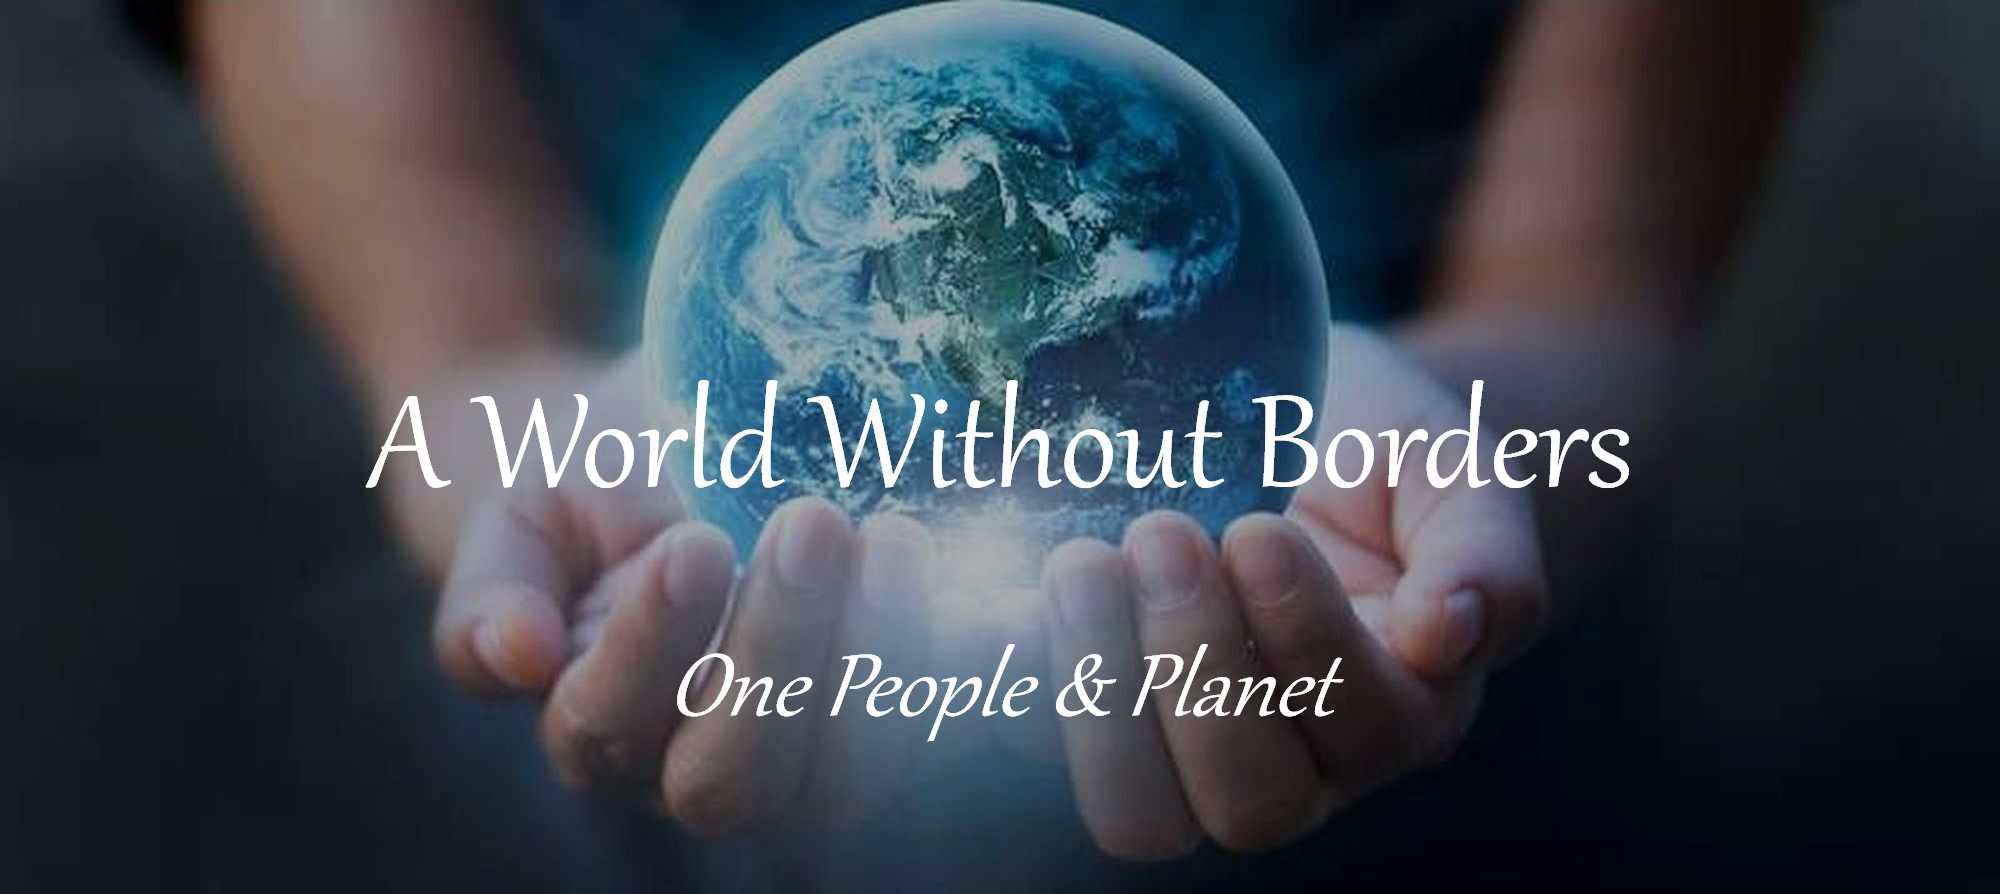 How You Can Become Younger & Help to Create a World Without Borders by accepting internal science